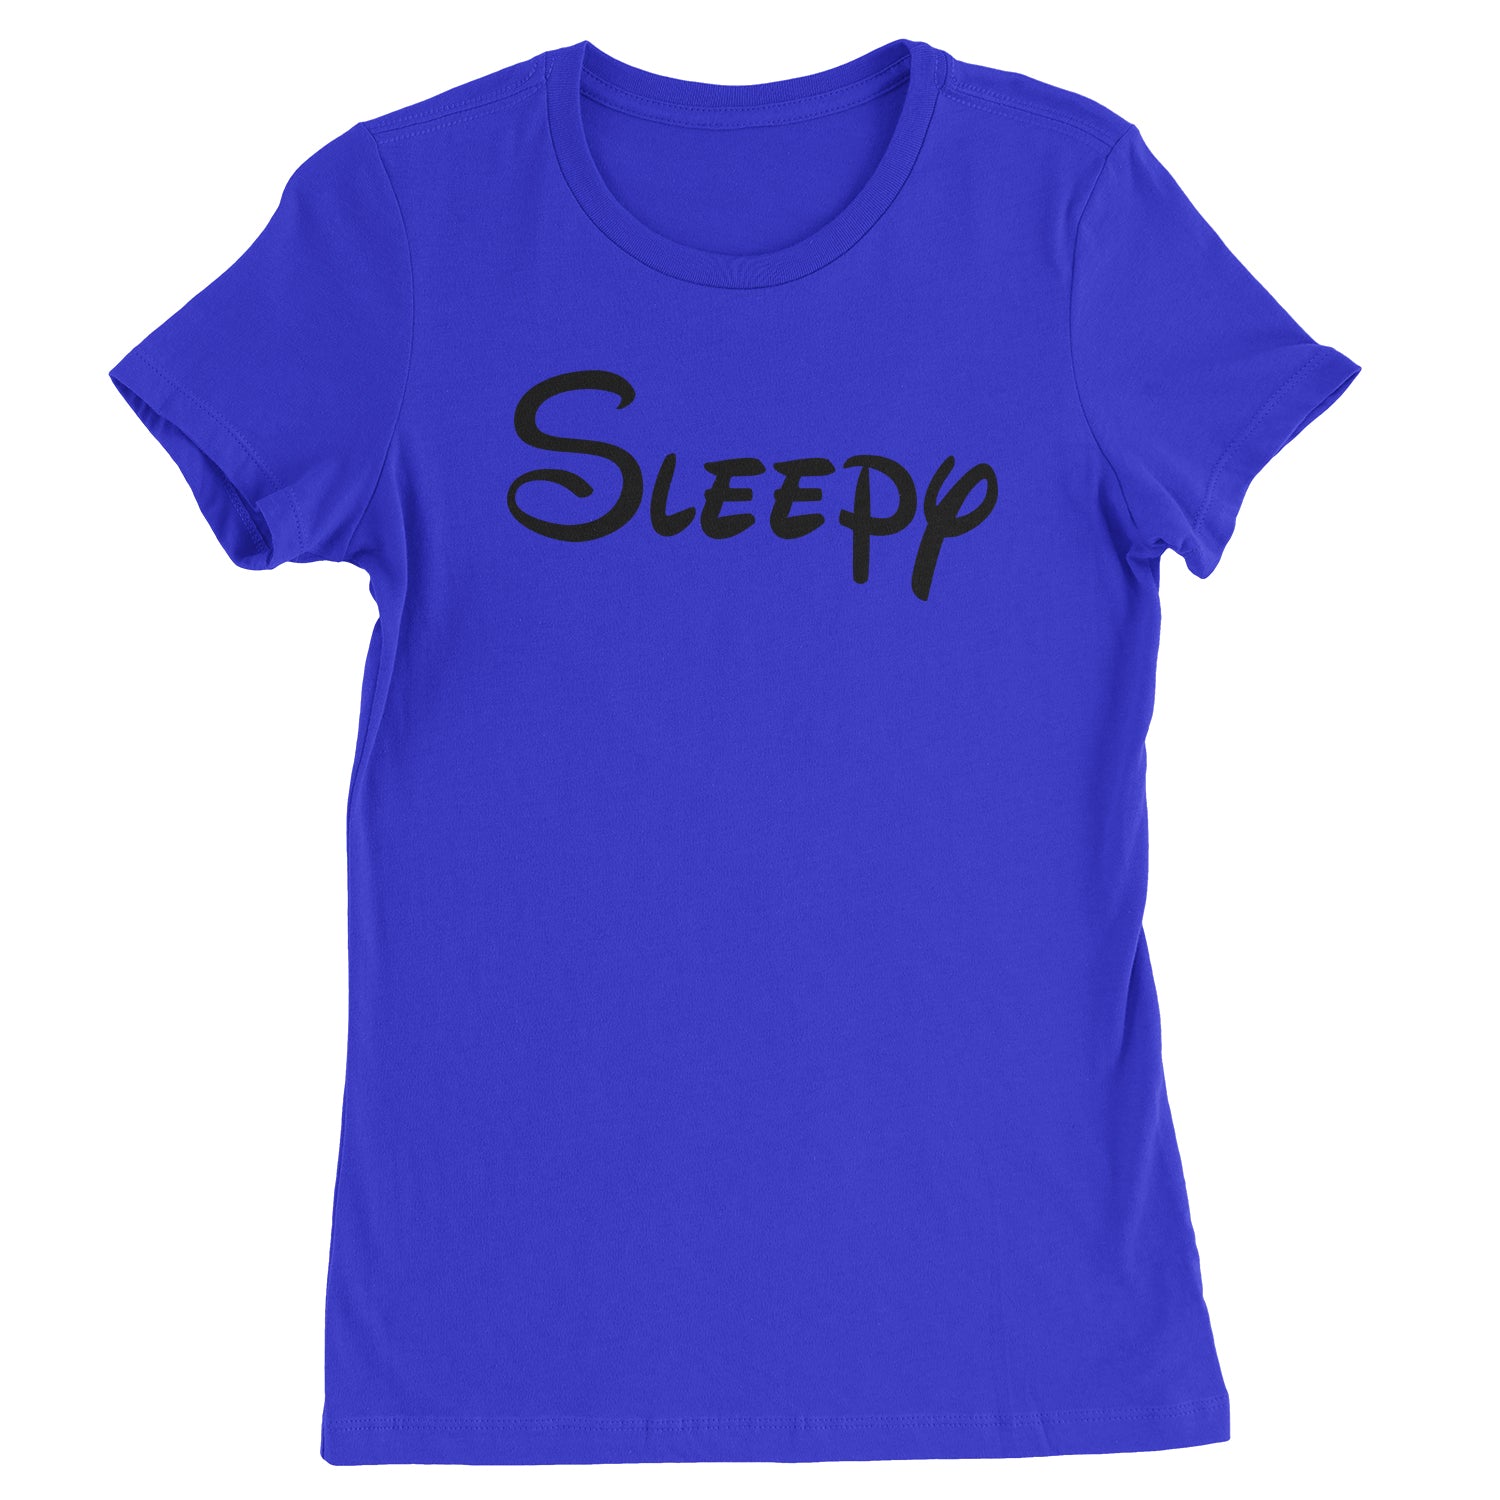 Sleepy - 7 Dwarfs Costume Womens T-shirt and, costume, dwarfs, group, halloween, matching, seven, snow, the, white by Expression Tees